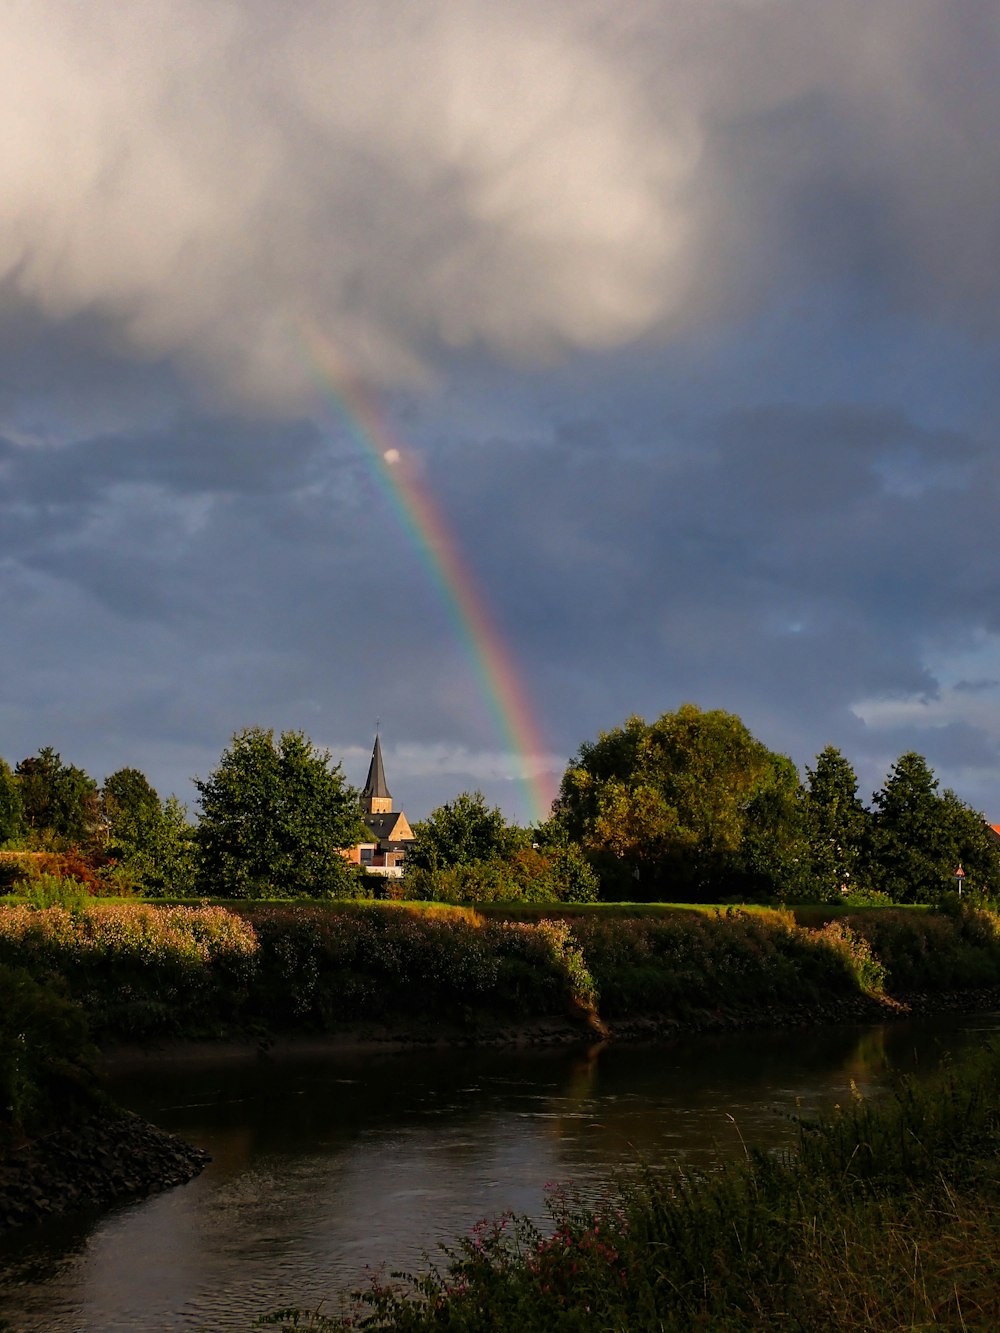 a rainbow in the sky over a river